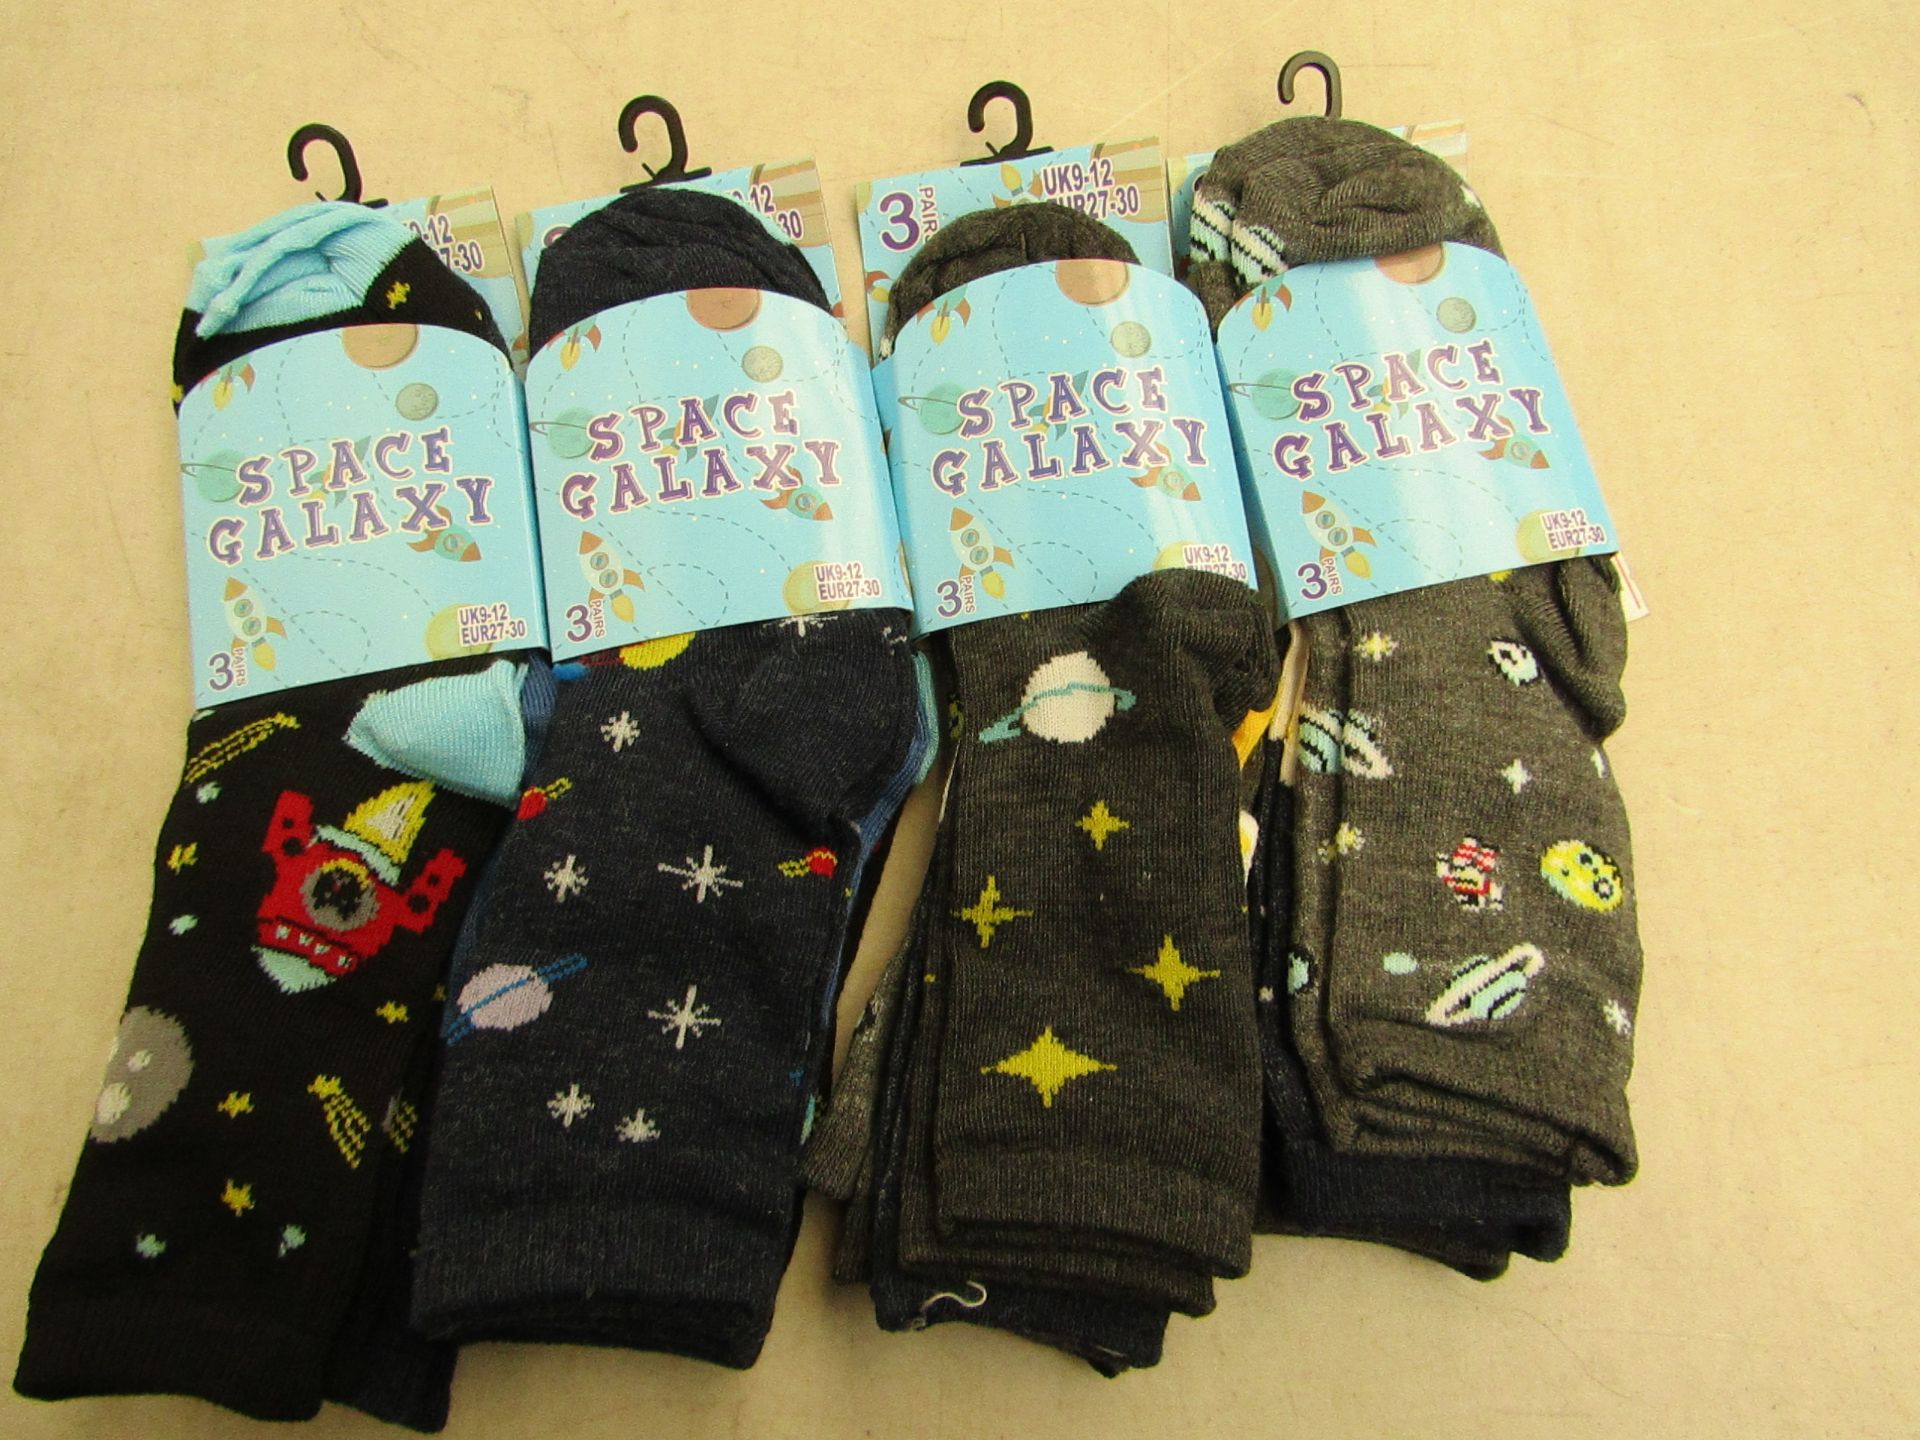 12 X Pairs of childrens socks space galaxy themed size 9-12 all new in packaging